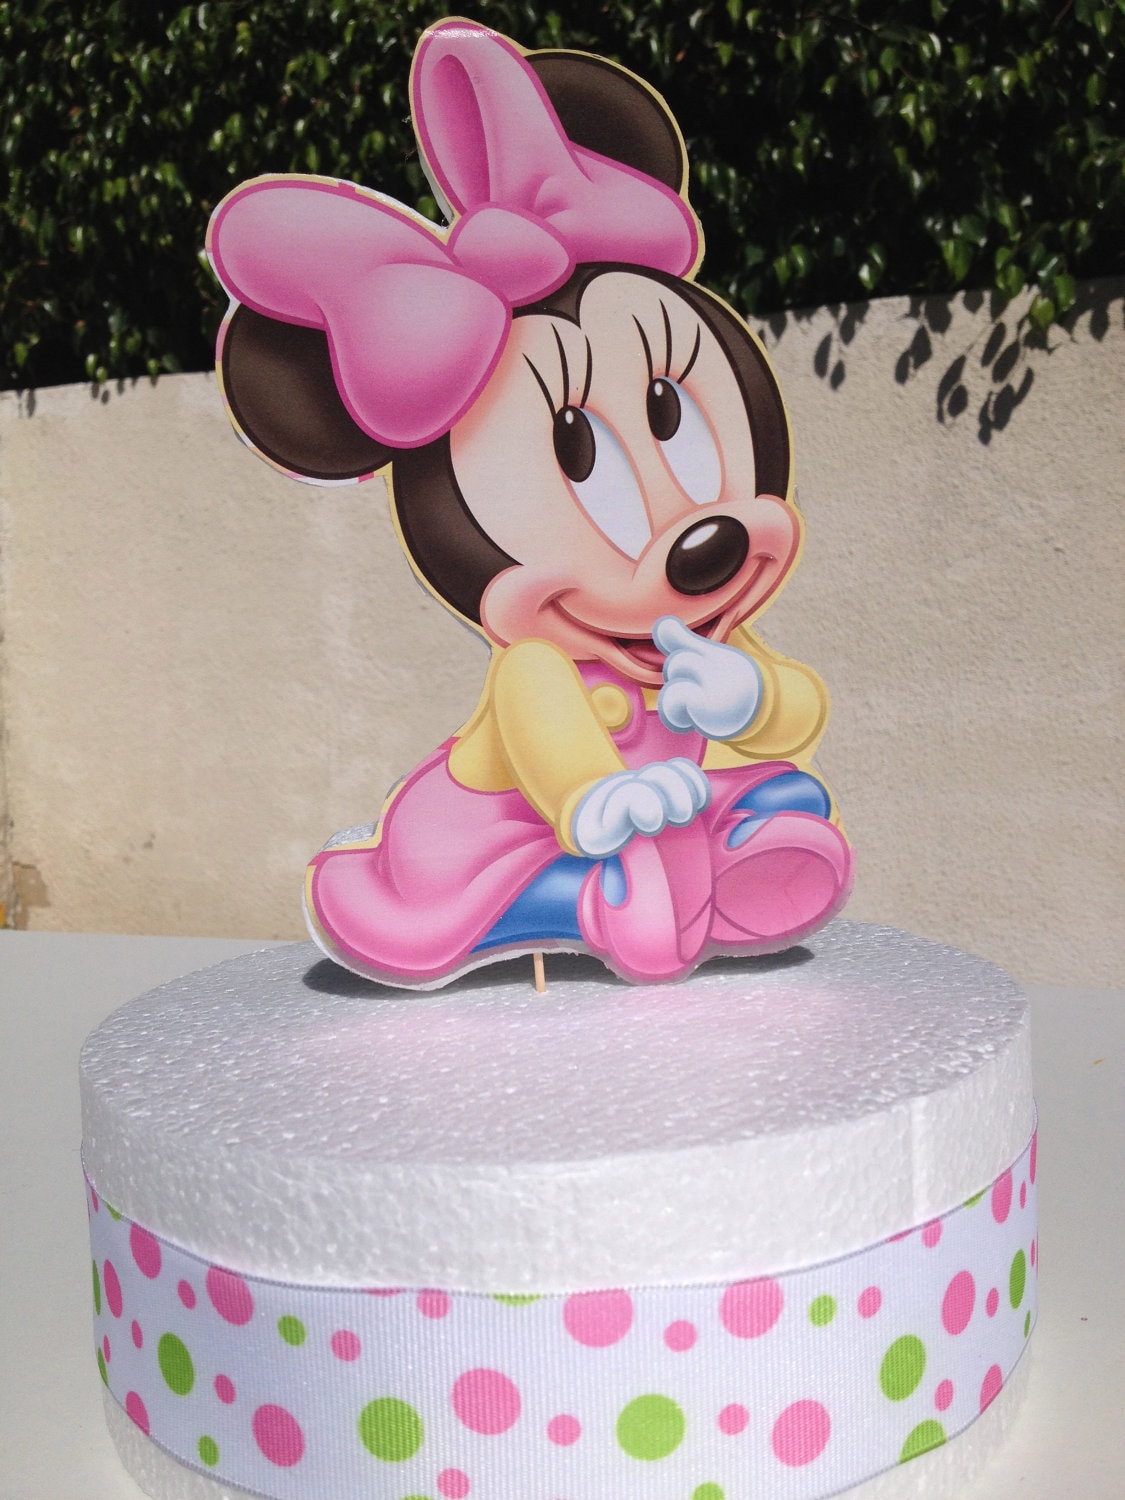 Popular items for minnie mouse cake topper on Etsy